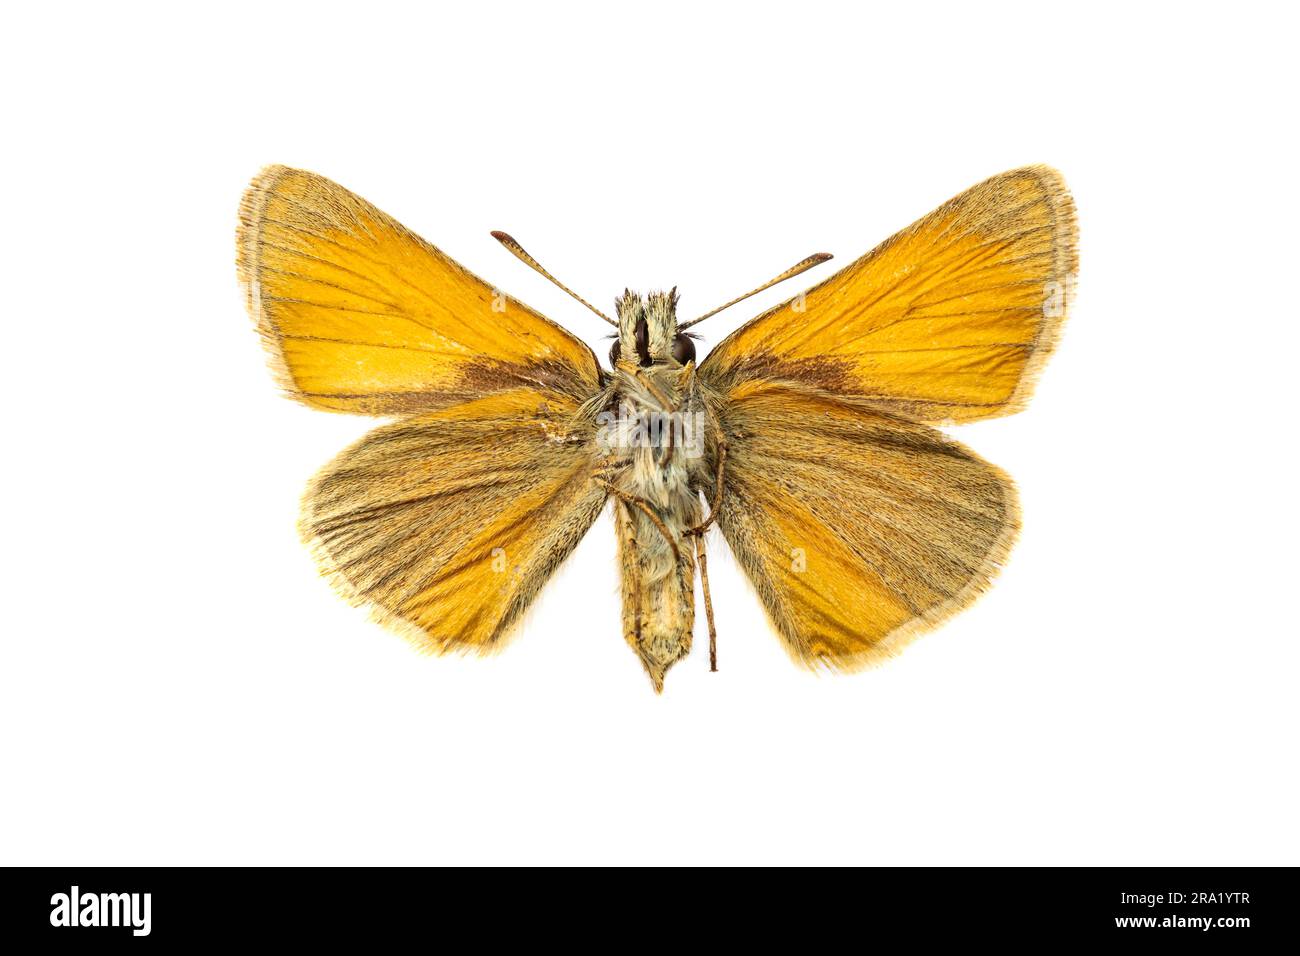 Essex skipper (Thymelicus lineolus, Thymelicus lineola), underside, cut out, Netherlands Stock Photo